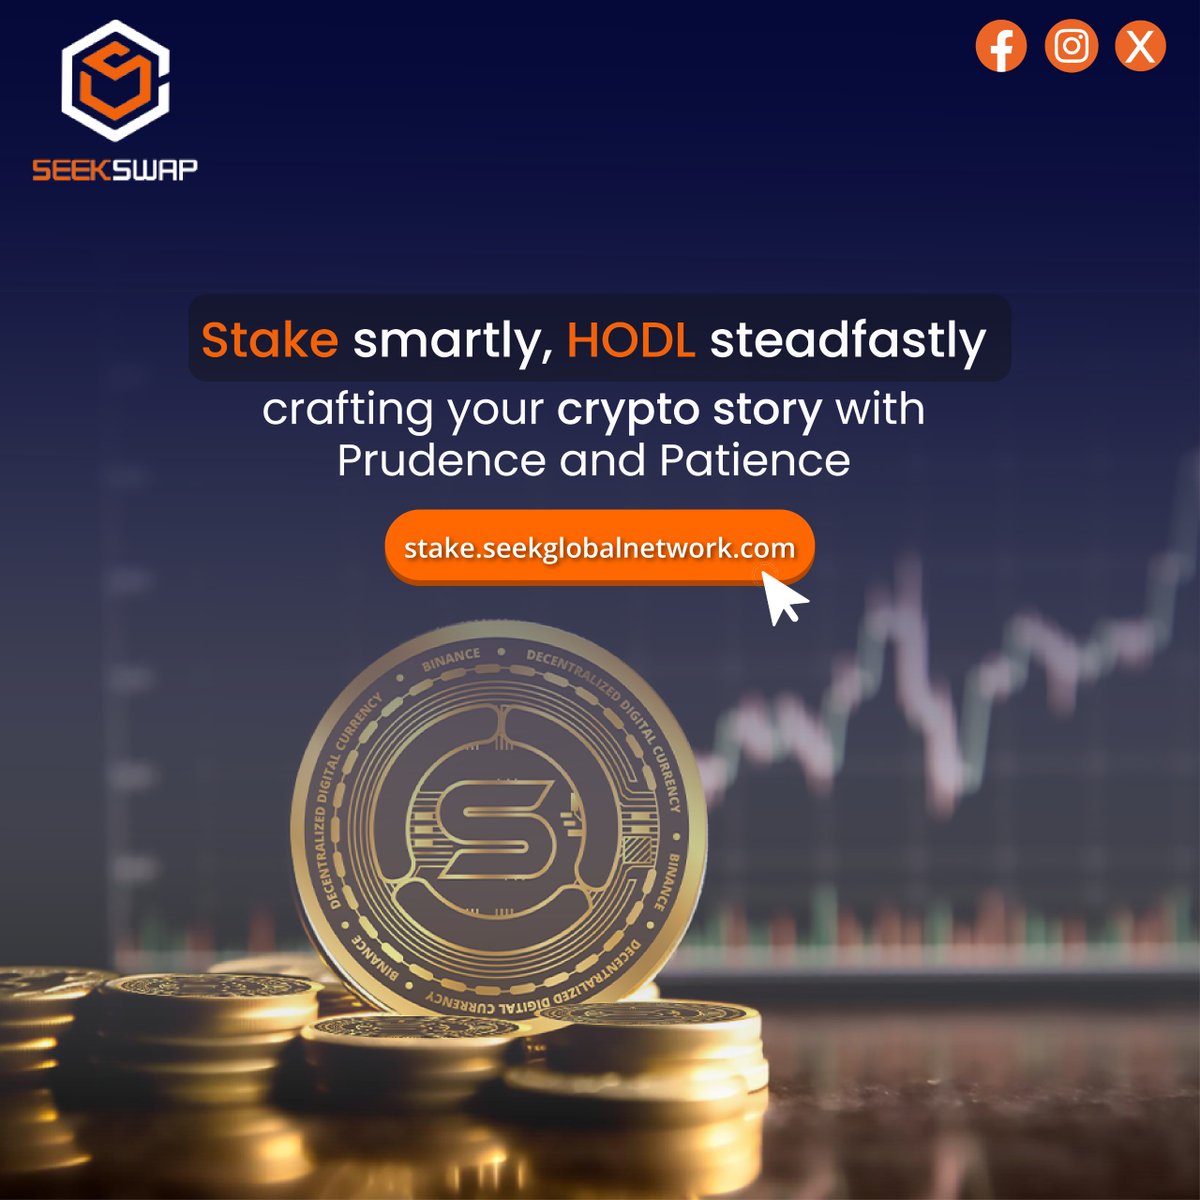 Craft your crypto story with prudence and patience – Stake smartly, HODL steadfastly at stake.seekglobalnetwork.com. 
#CryptoStory #StakeSmartly #HODL #PrudenceAndPatience #SeekGlobalNetwork #seekswap #seekcoin #seekstaking #CryptoStaking